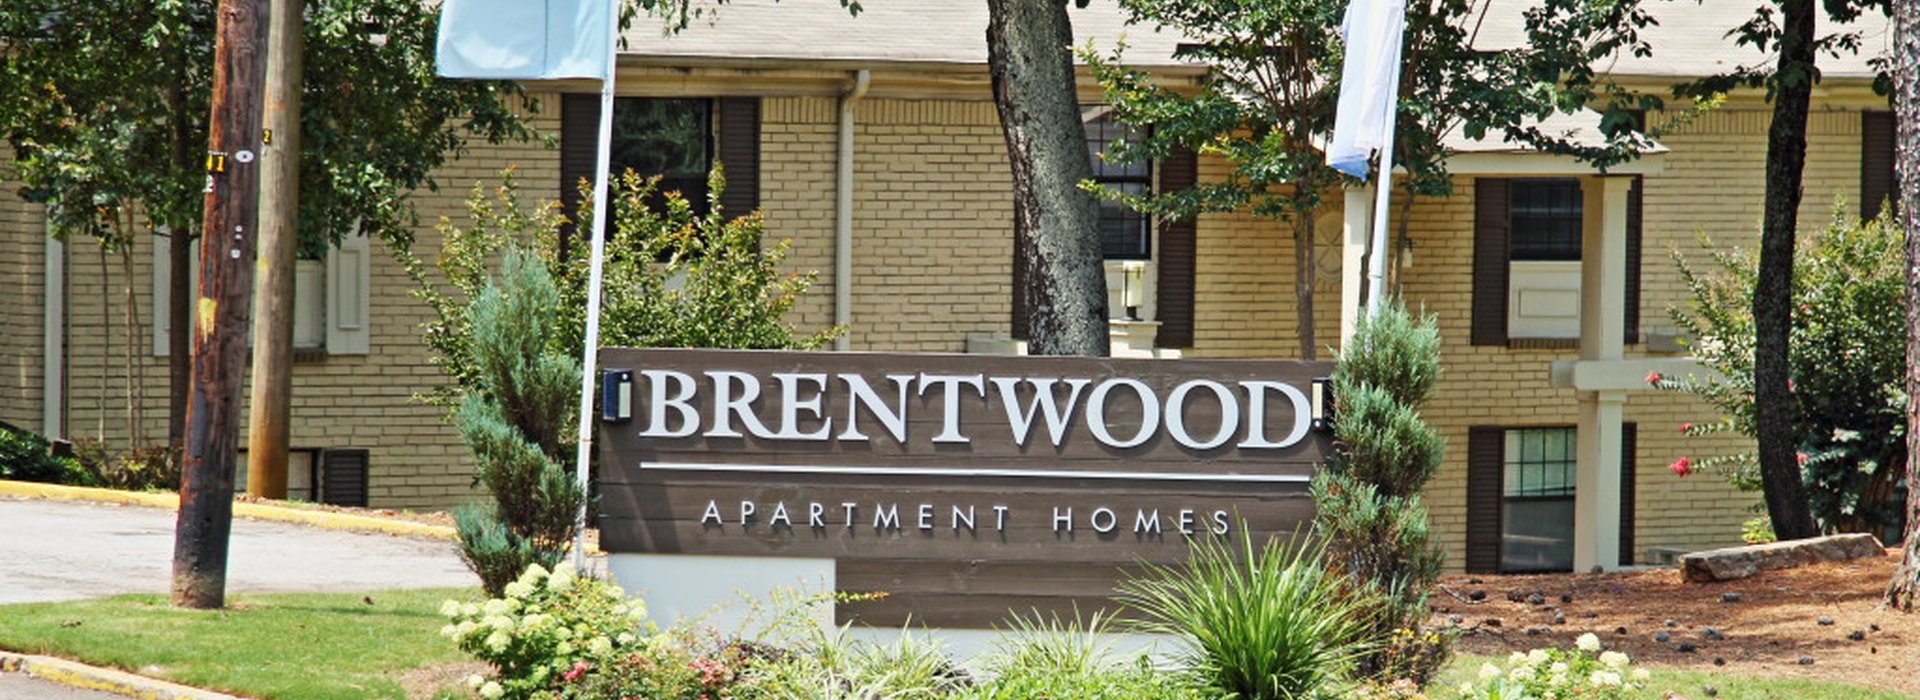 View of Brentwood Signage